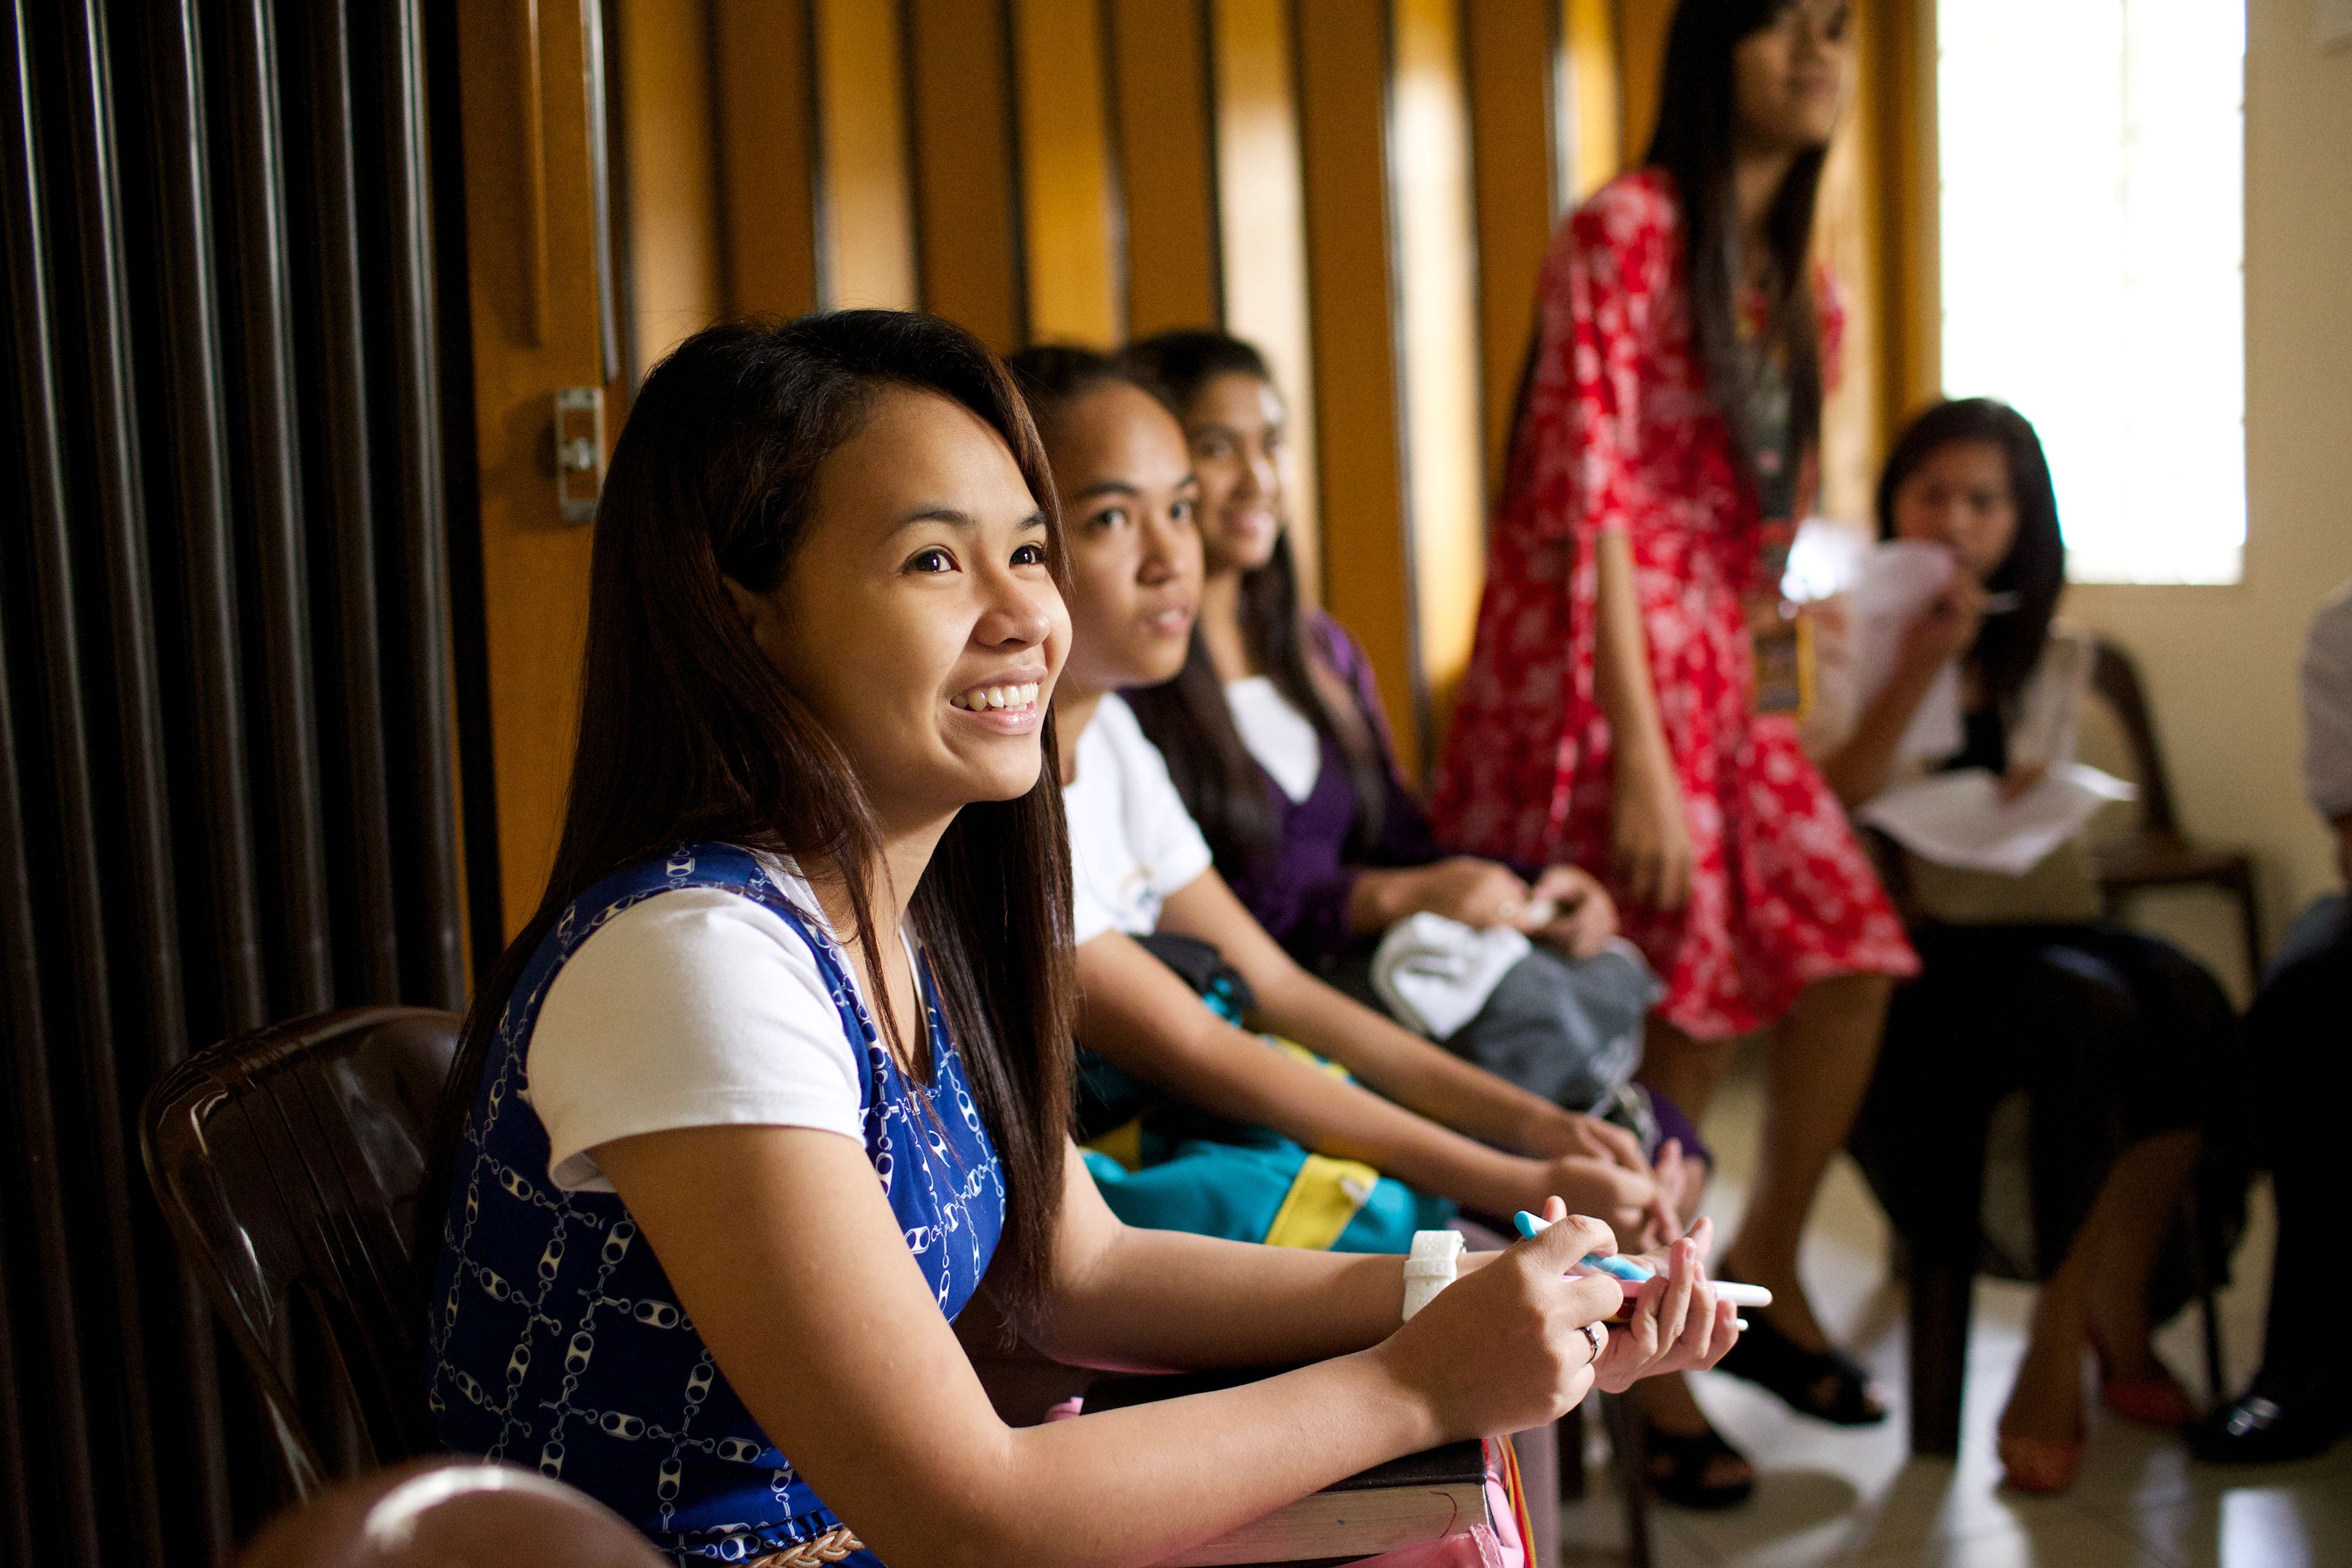 A group of young women from the Philippines sitting in a classroom at church.